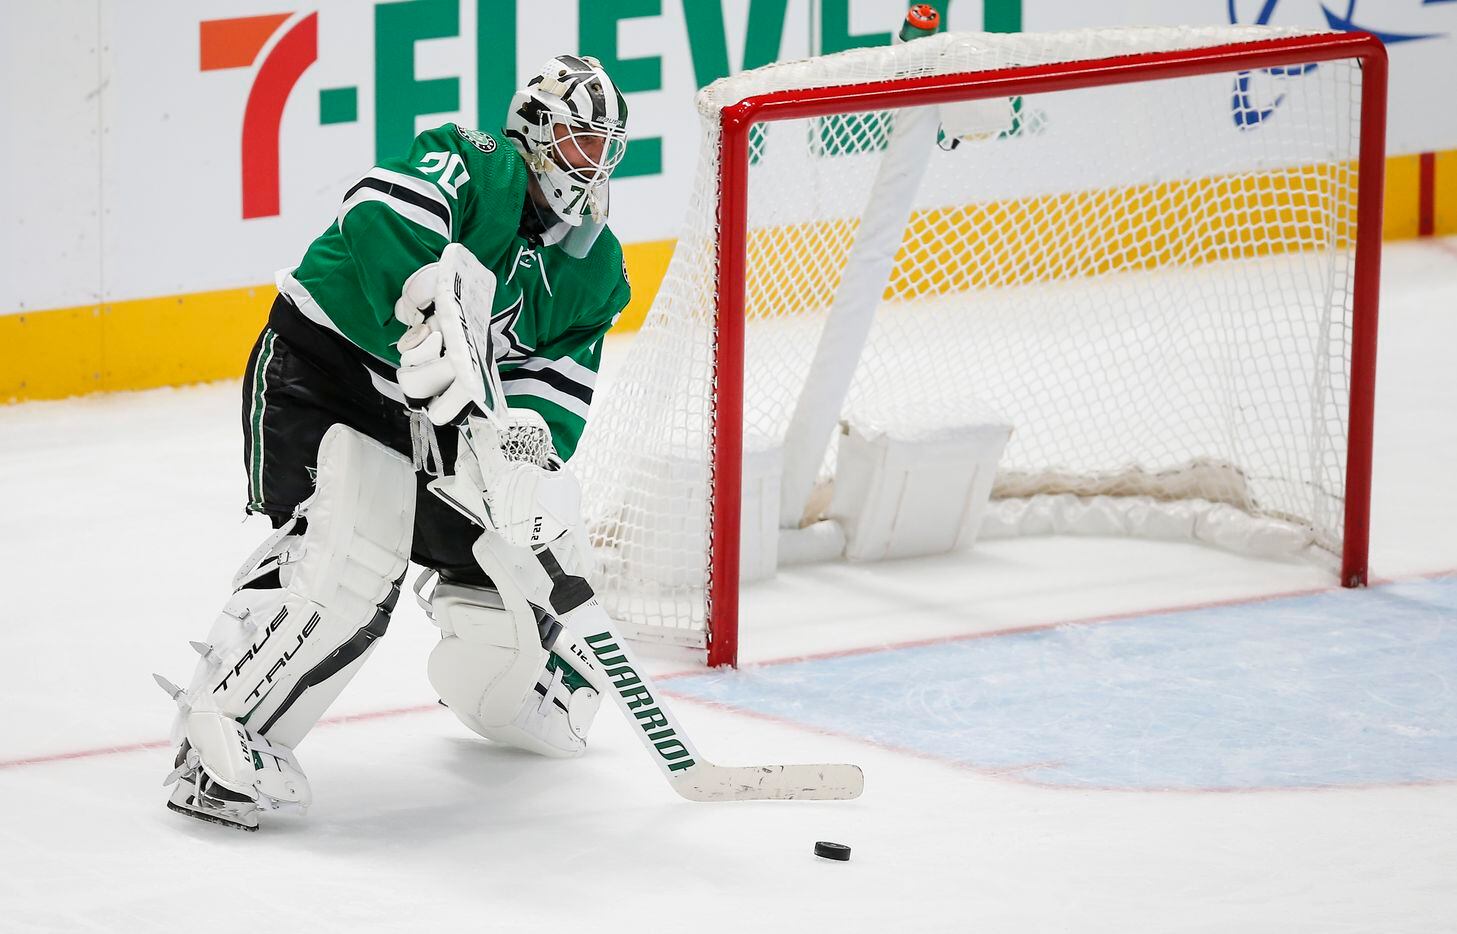 Dallas Stars goaltender Braden Holtby (70) plays the puck away from the net during the second period of an NHL hockey game against the Colorado Avalanche in Dallas, Friday, November 26, 2021. (Brandon Wade/Special Contributor)